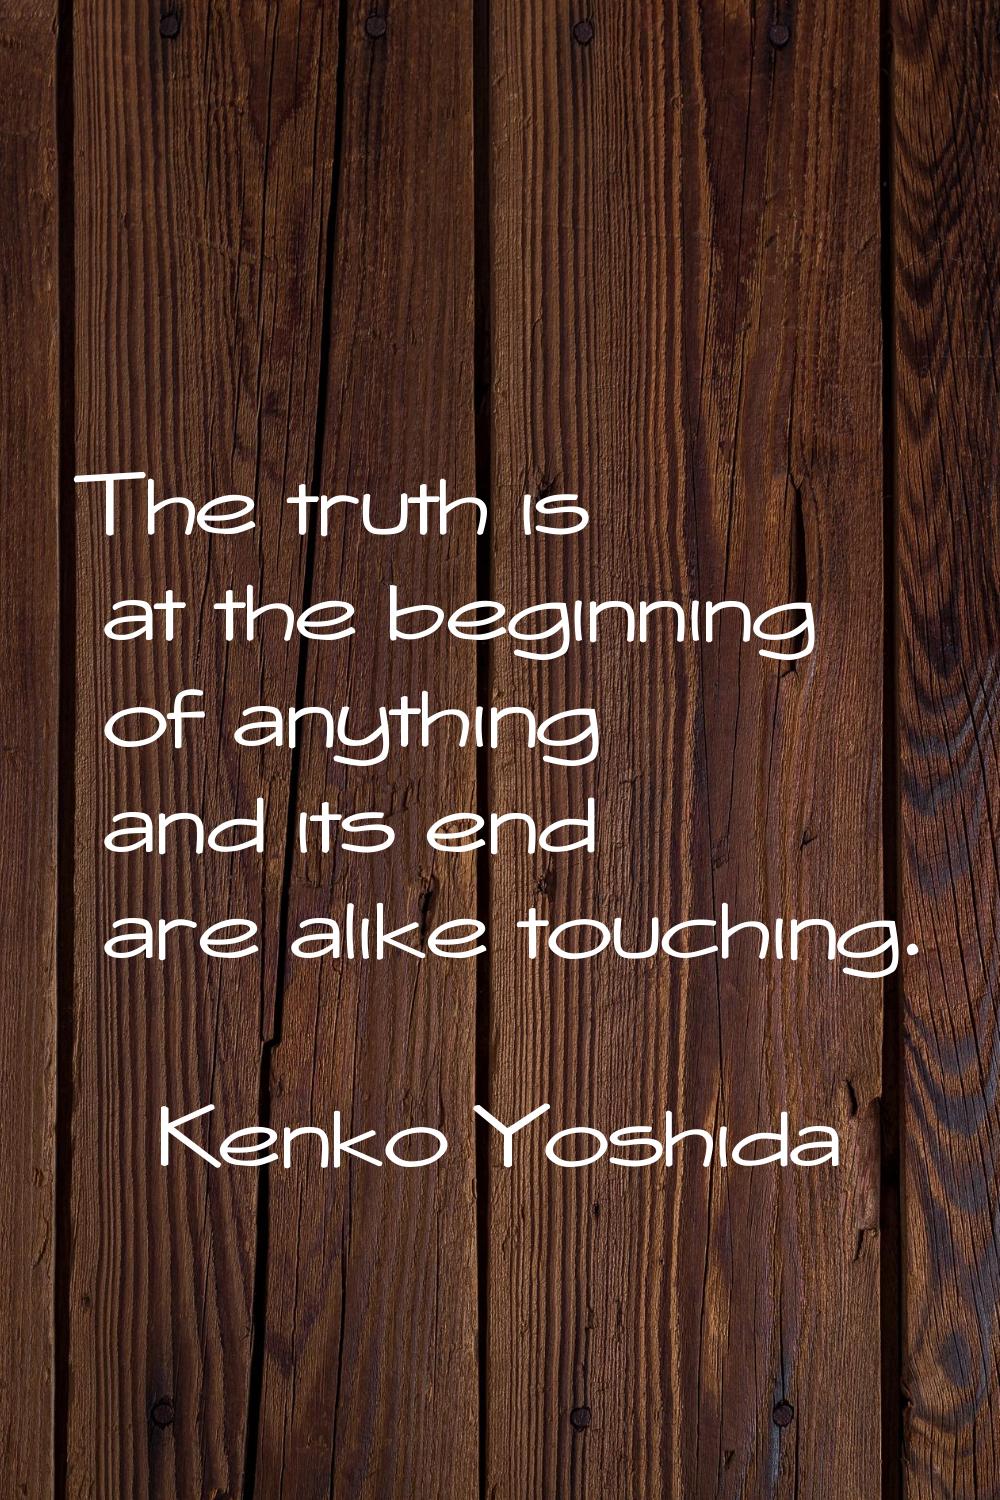 The truth is at the beginning of anything and its end are alike touching.